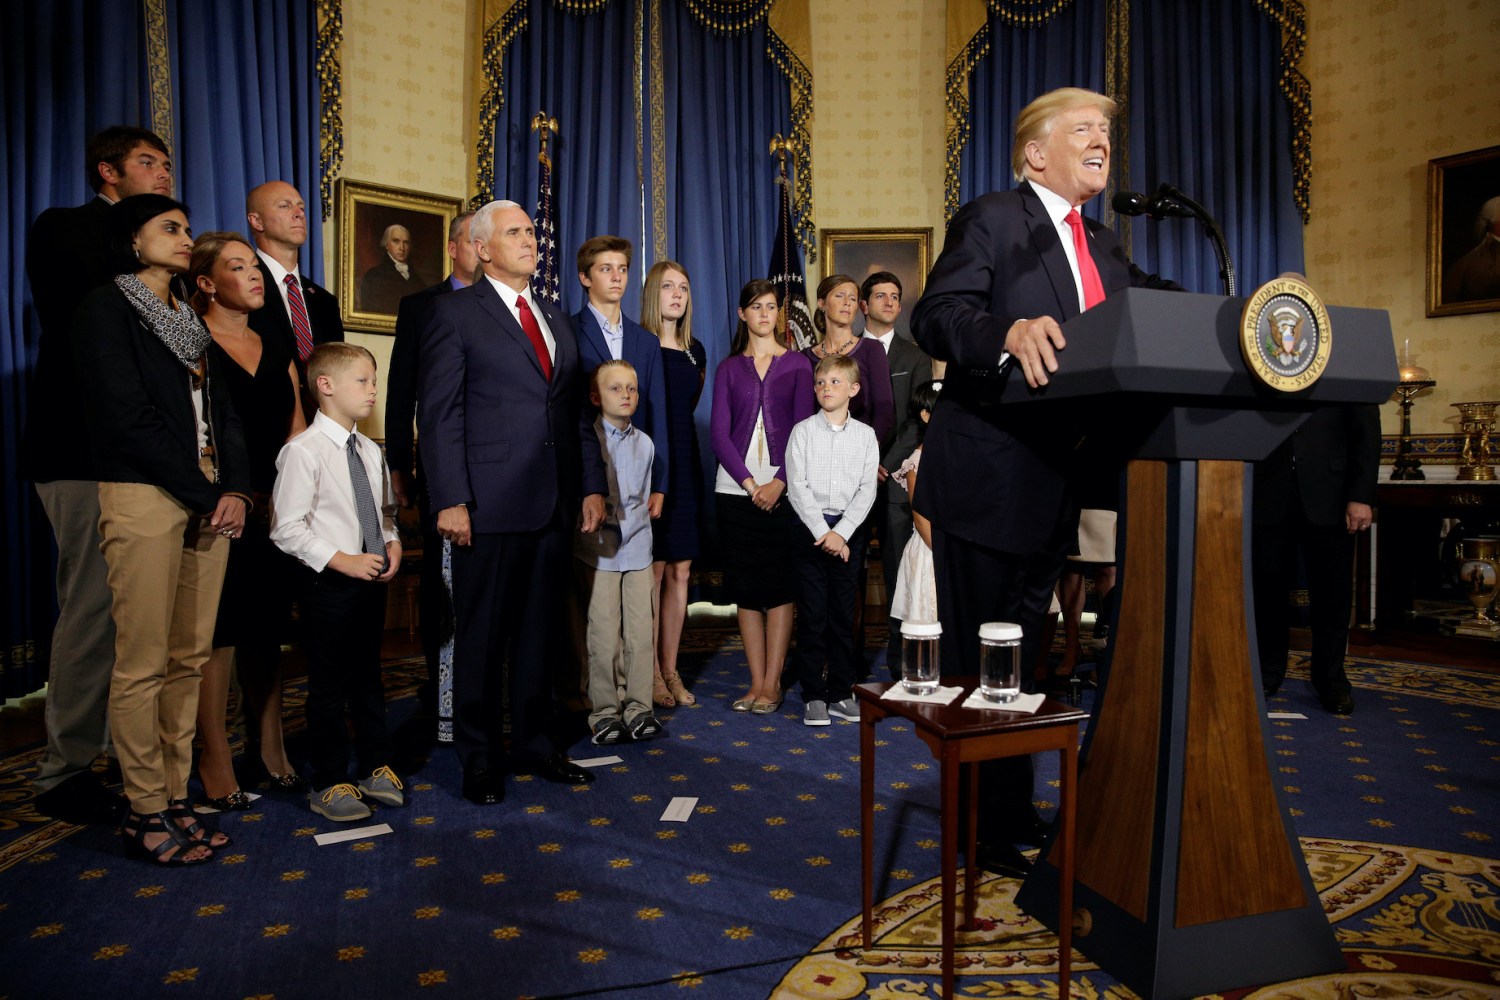 U.S. President Donald Trump calls on Republican Senators to move forward and vote on a healthcare bill to replace the Affordable Care Act as people negatively affected by the law stand behind him in the Blue Room of the White House in Washington, U.S., July 24, 2017.   REUTERS/Joshua Roberts